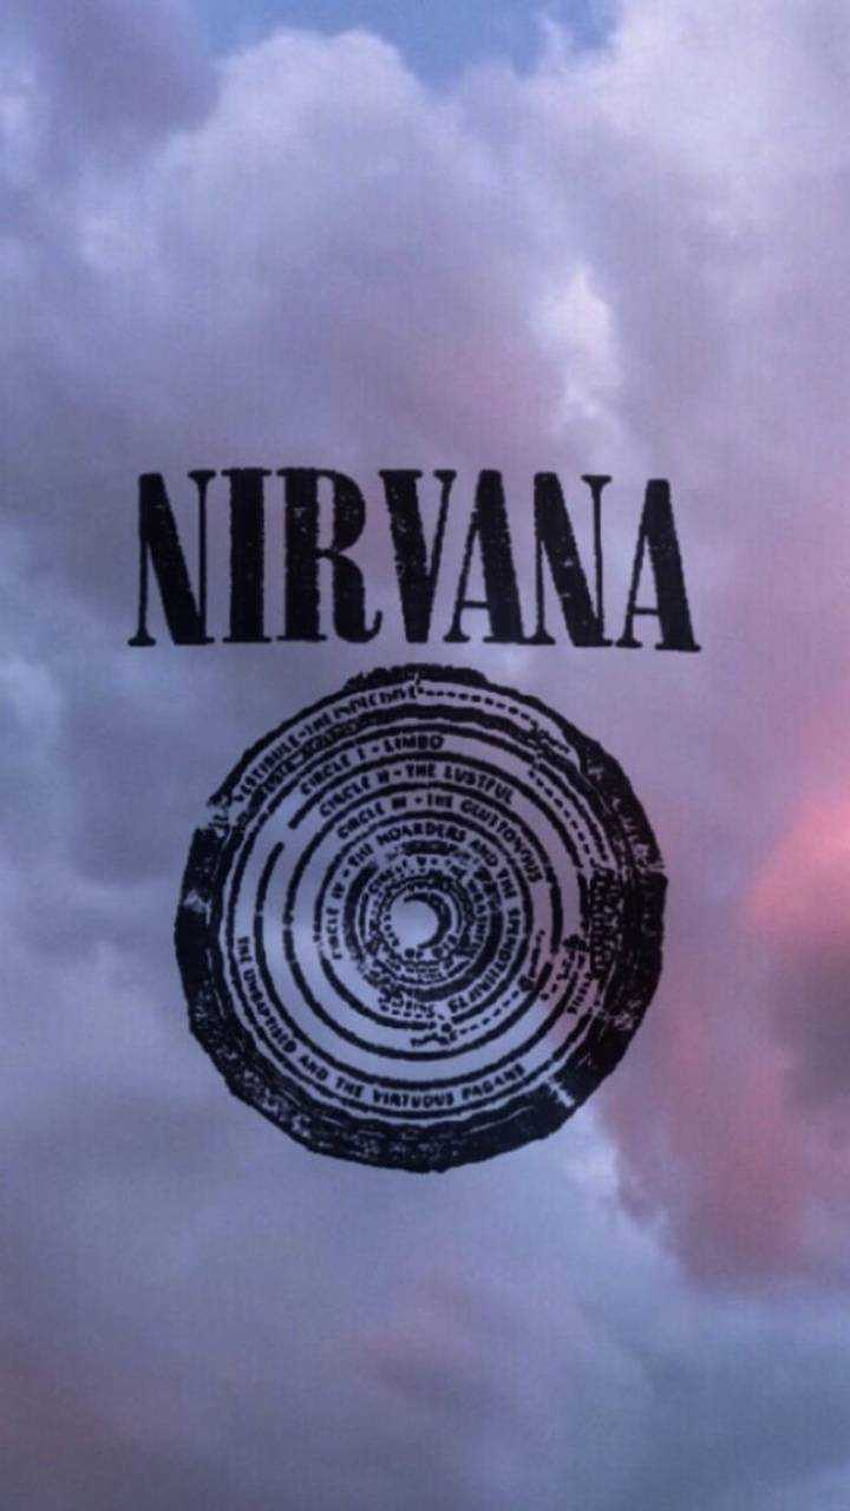 50 Nirvana Wallpapers made by me for AndroidiPhone  rNirvana